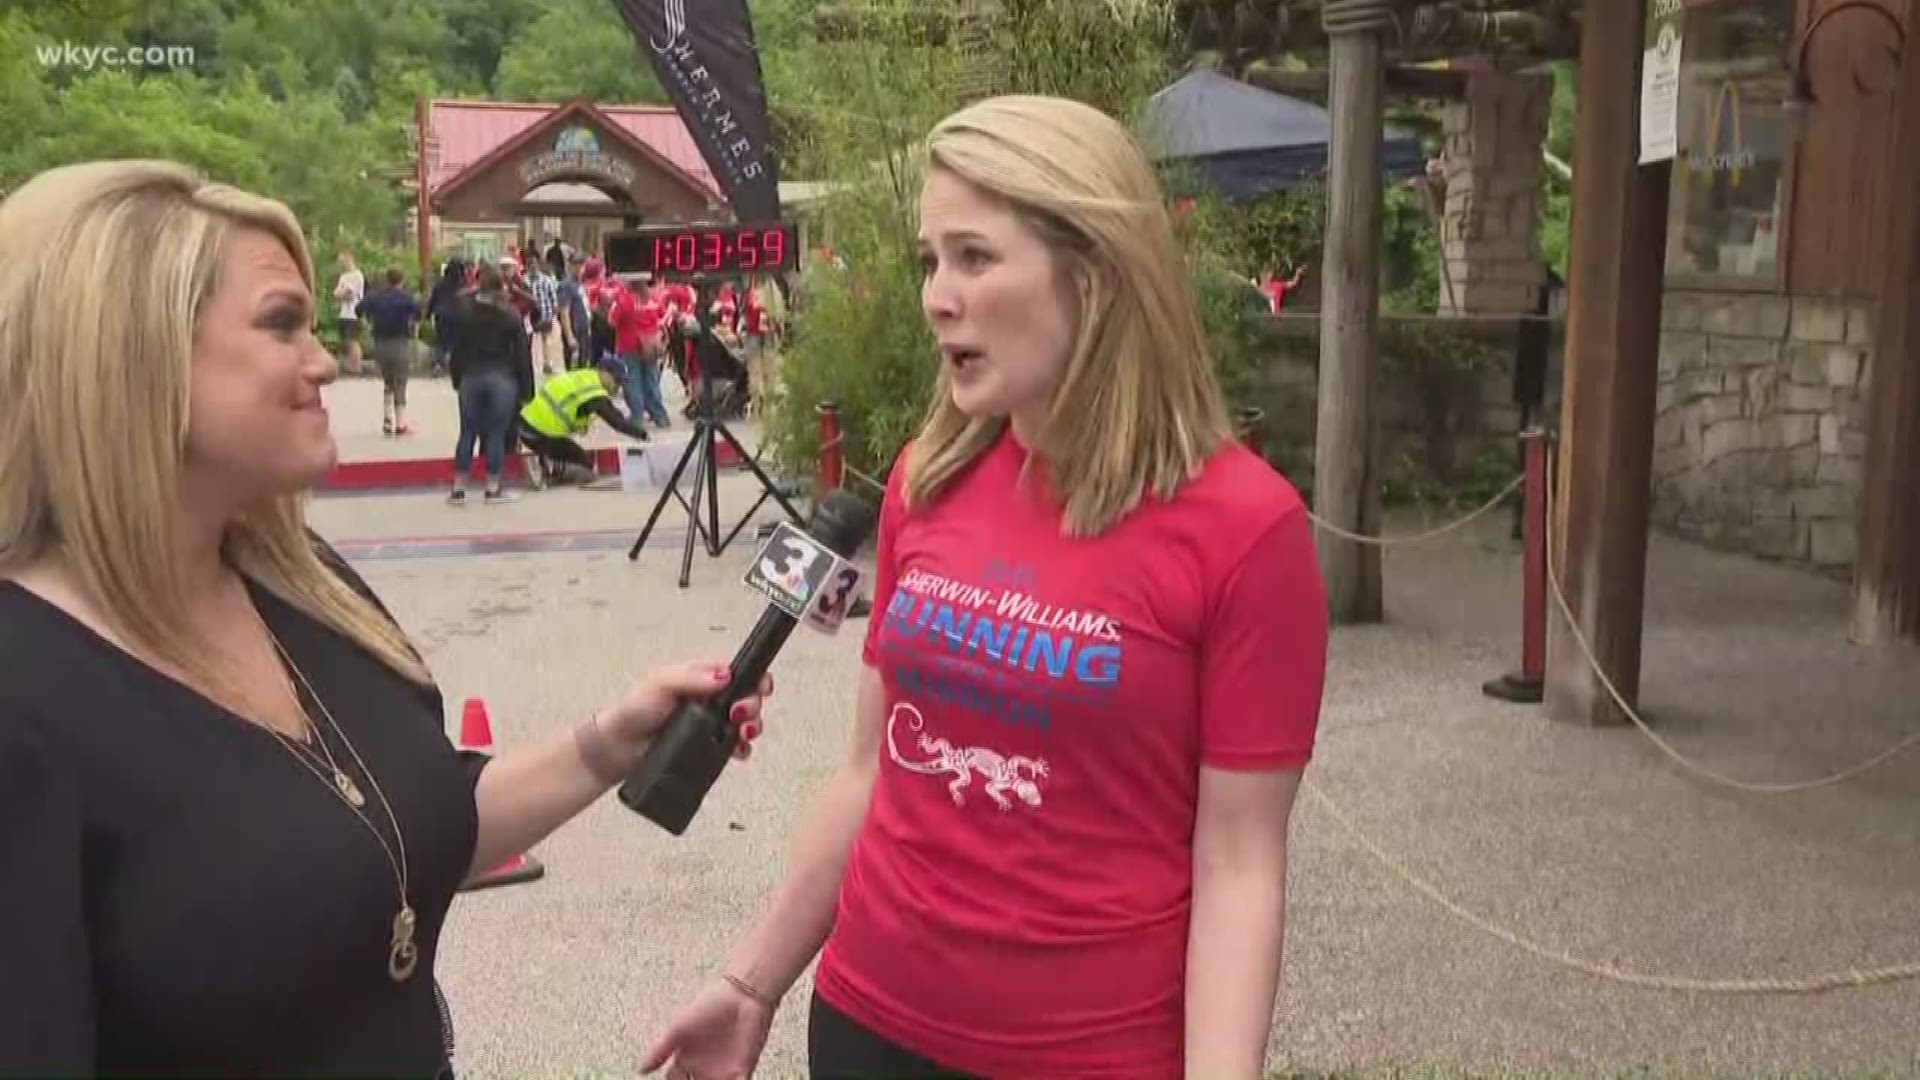 Running with a Mission raises money for the Cleveland City Mission at Cleveland Metroparks Zoo